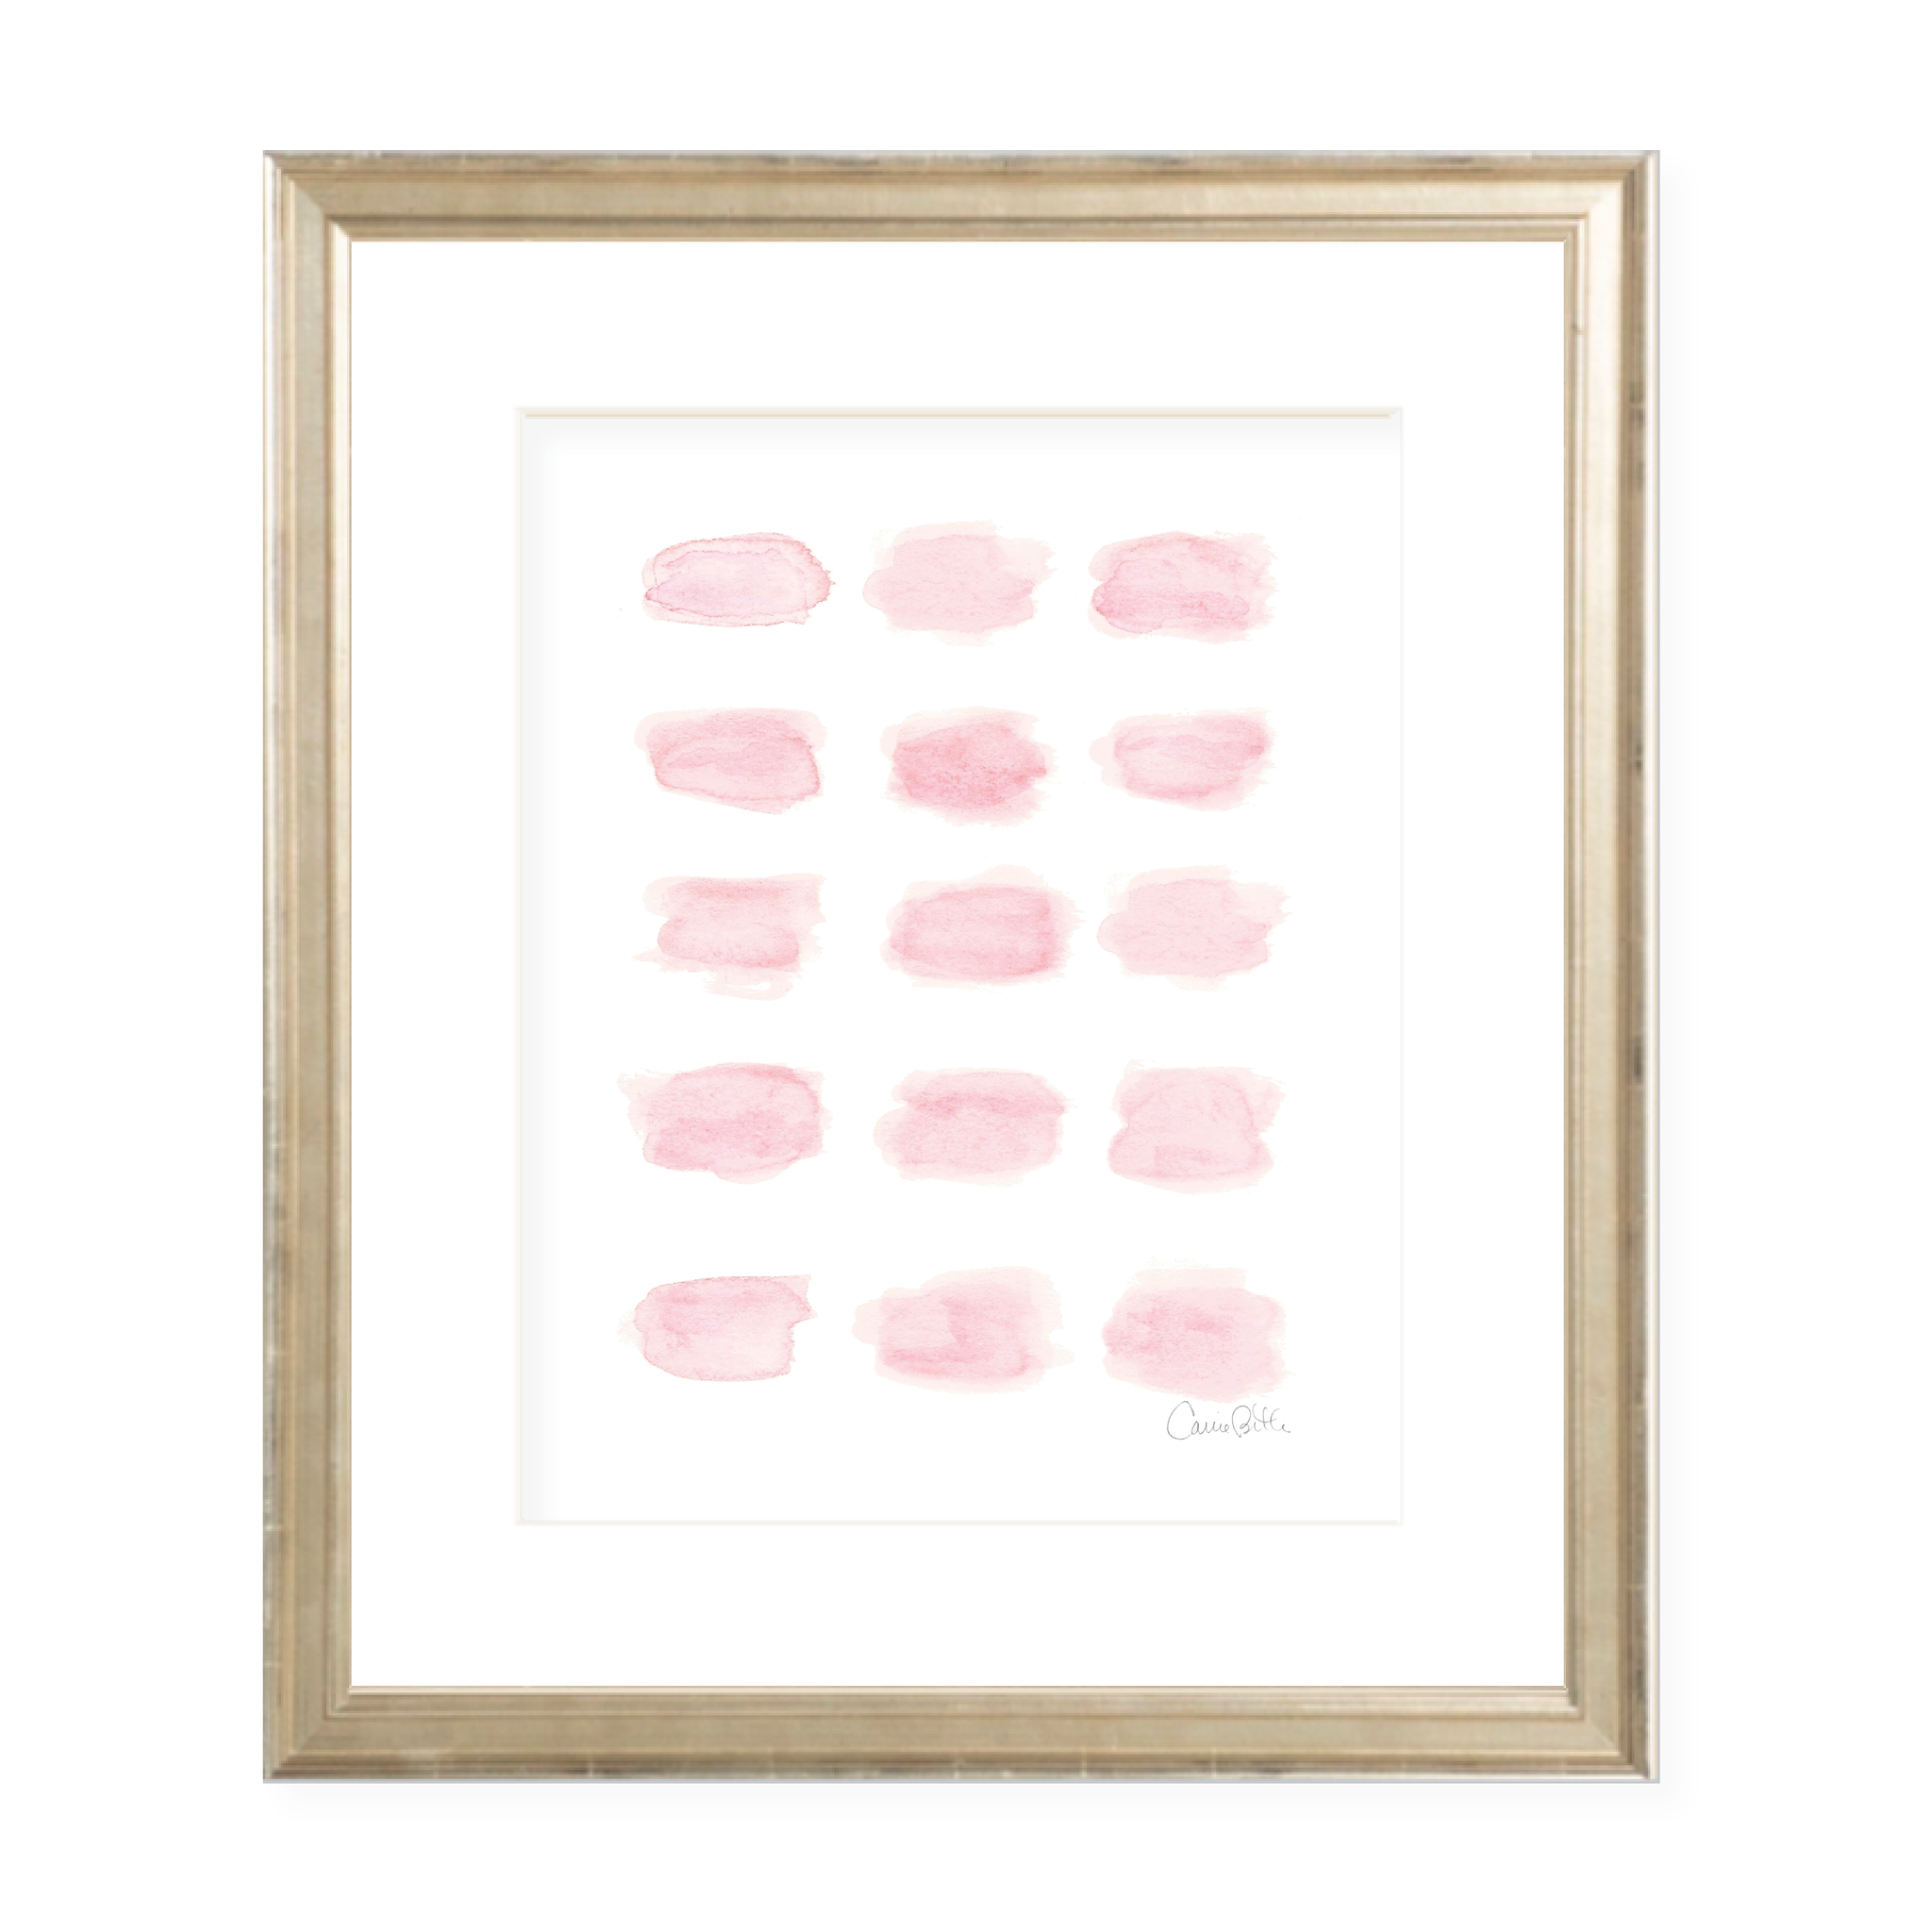 Momma's Love Pink Watercolor Print by Sugar B Designs